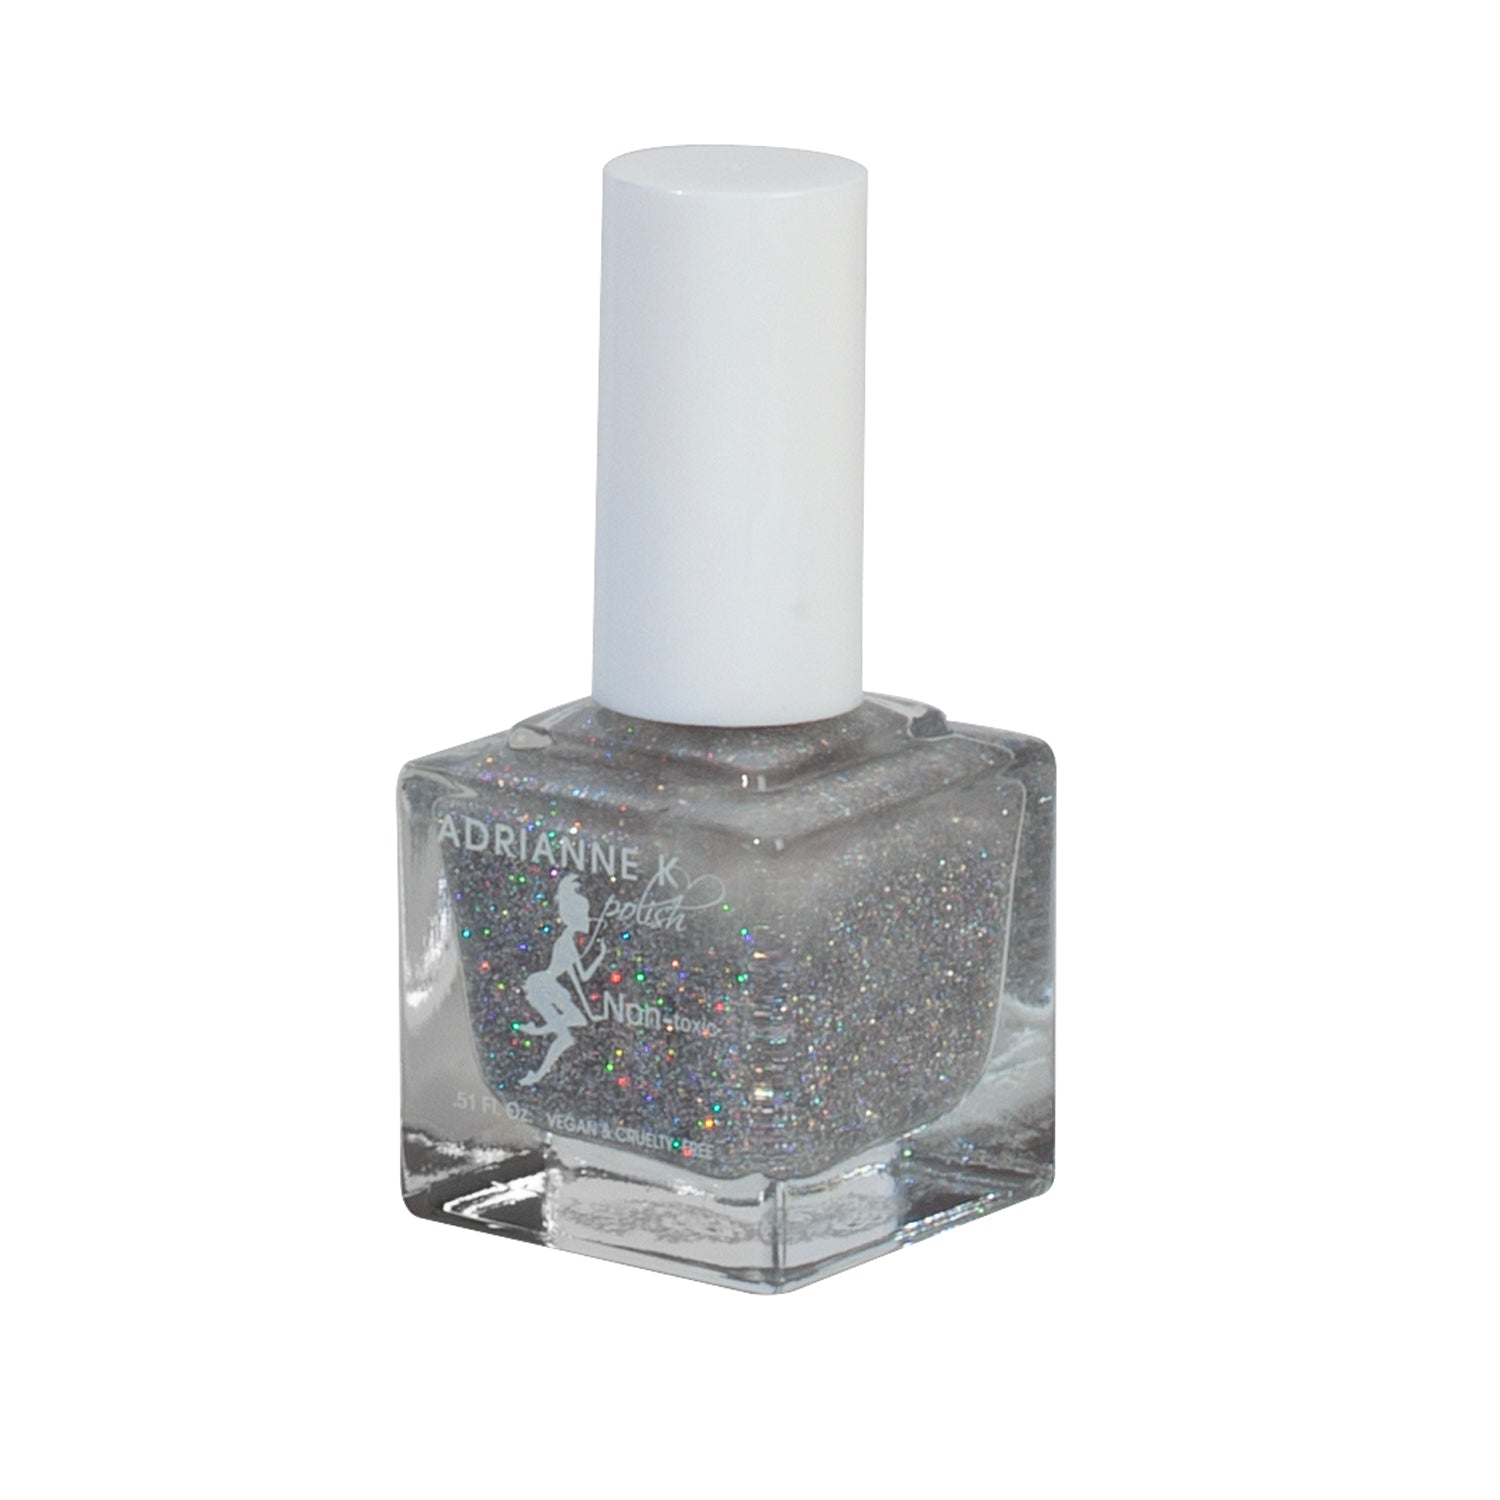 ADRIANNE K Nontoxic Glitter Nail Polish, Clear Topcoat Lacquer With Multicolor Glitter, Majestic! Quick Dry. Long Lasting, .51 Fl Oz